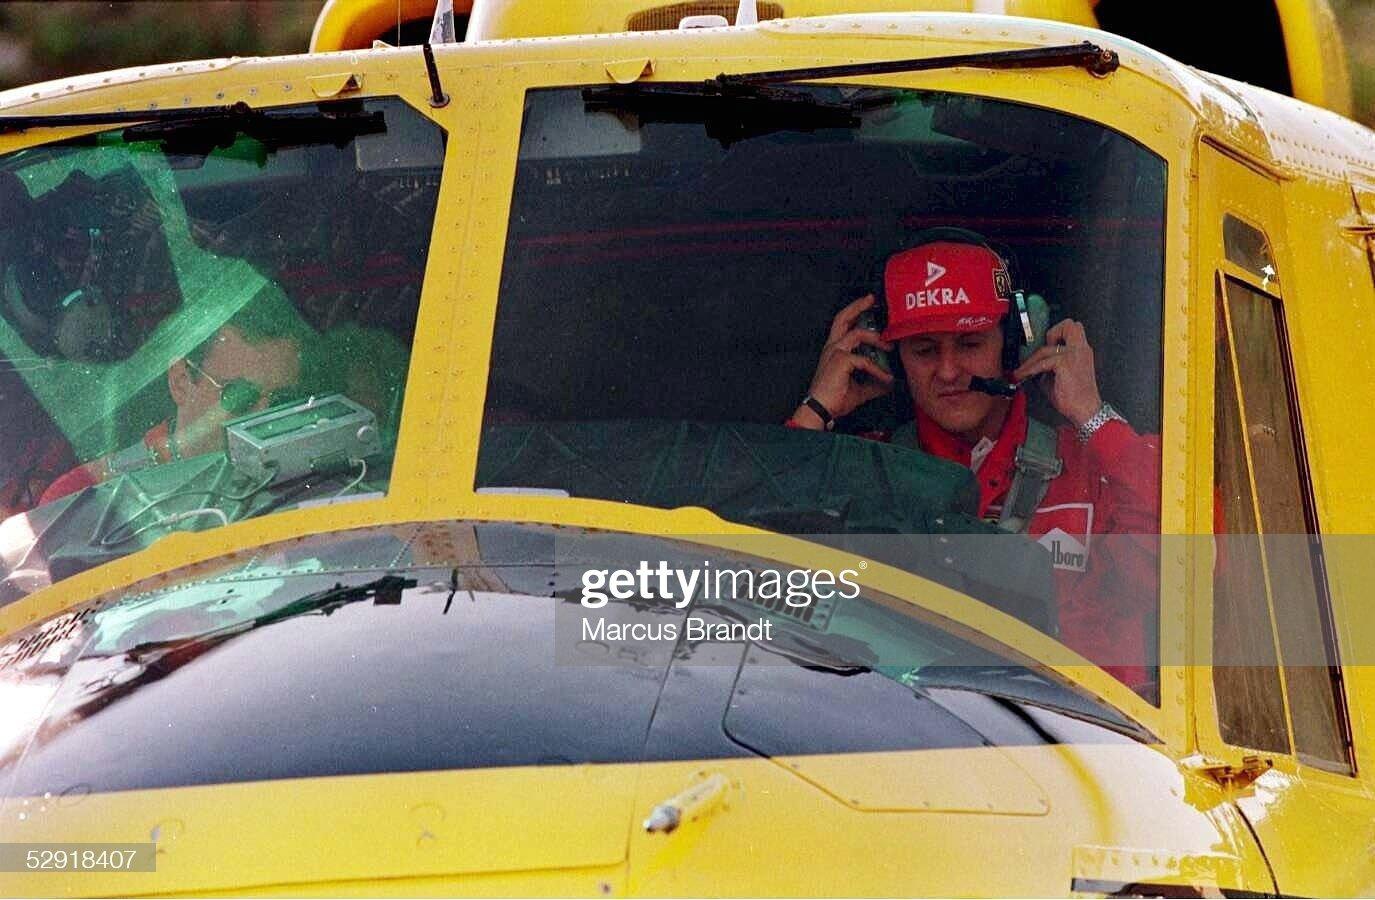 May 22, 1997. F1 Spanish Grand Prix in Barcelona. Michael Schumacher as co-pilot in the helicopter.